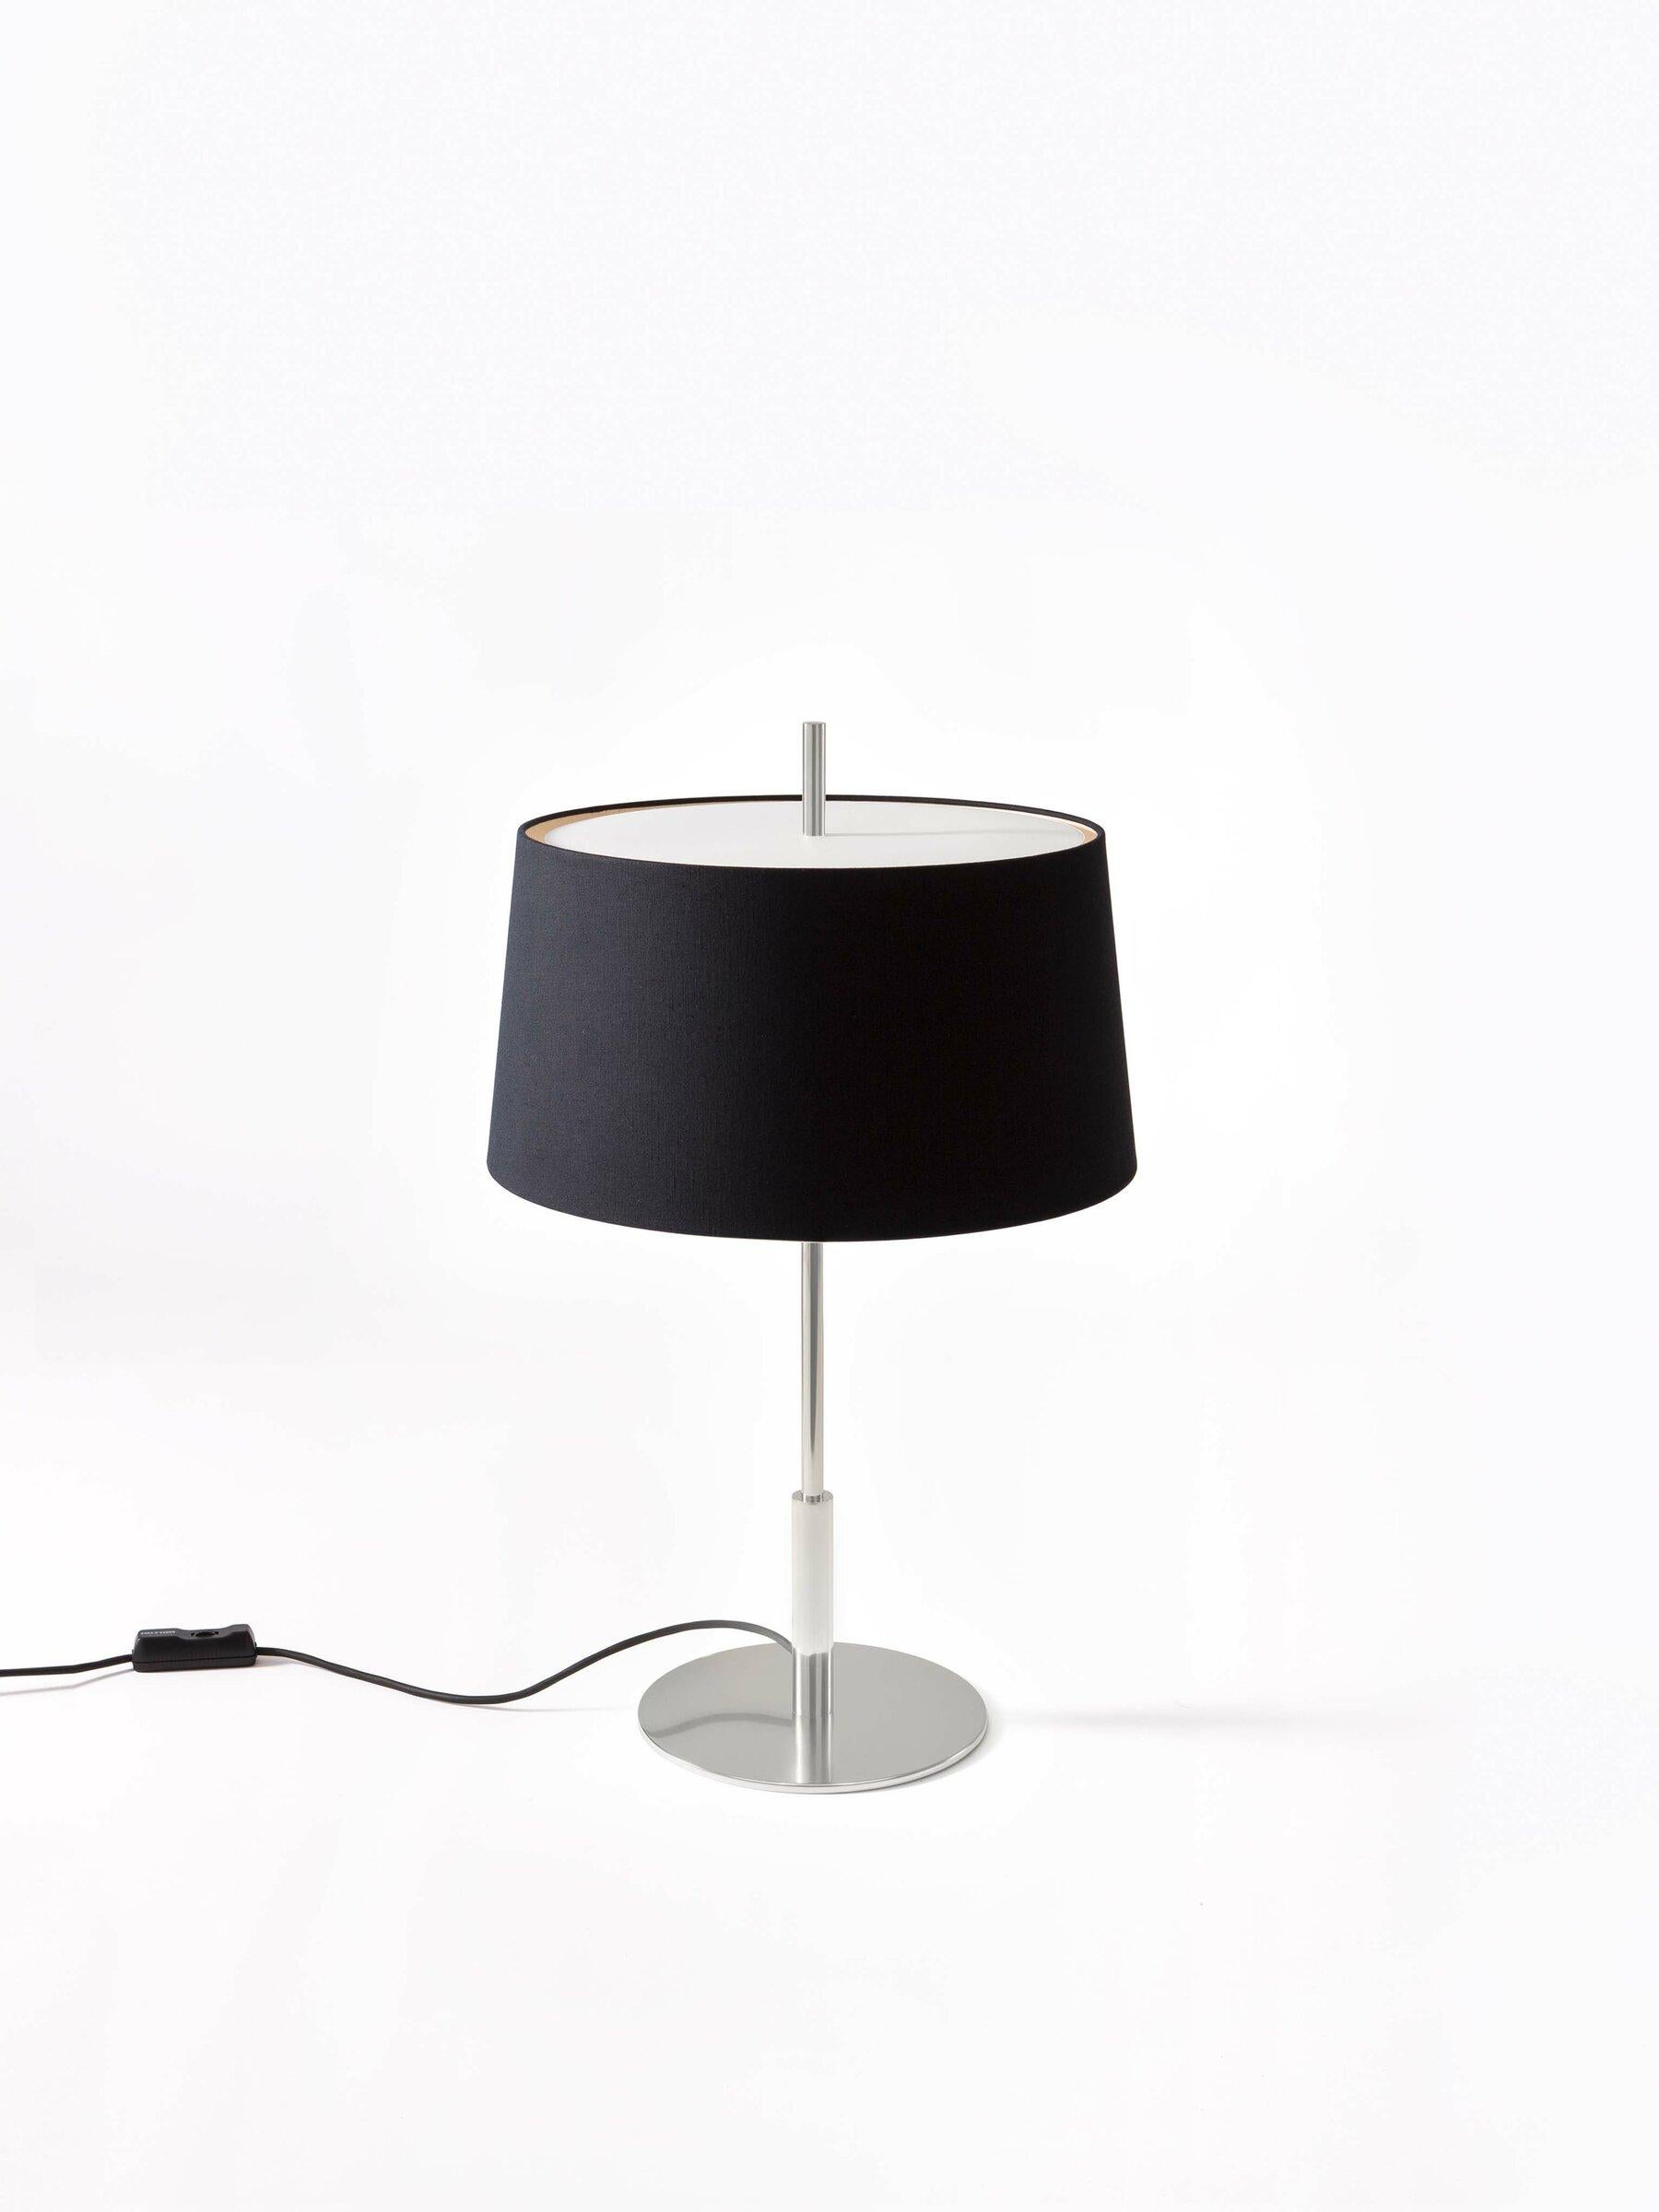 Nickel Diana table lamp by Federico Correa, Alfonso Milá, Miguel Milá
Dimensions: D 45 x H 78 cm
Materials: black linen, nickel.
Available in black or white lampshade and in gold or nickel finish.

In keeping with the calling of its creators,